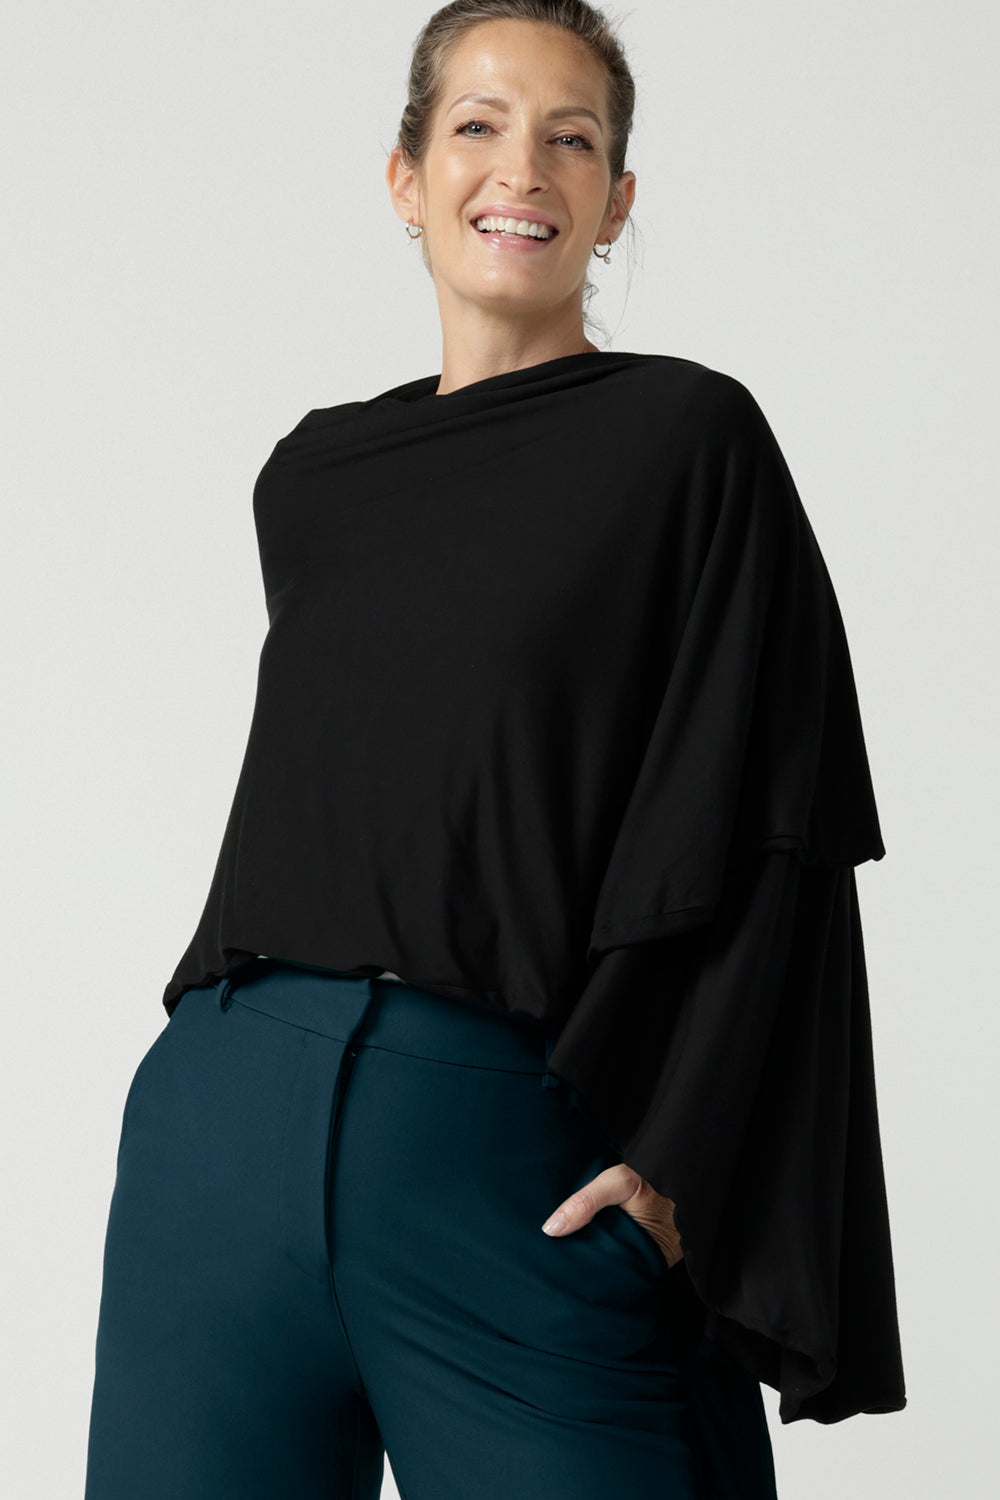 Model is wearing In thermo-regulating, luxurious bamboo jersey Poncho in Black Bamboo by Australian Made brand Leina&Fleur specialising ladies wear in sizes from 8 to 24